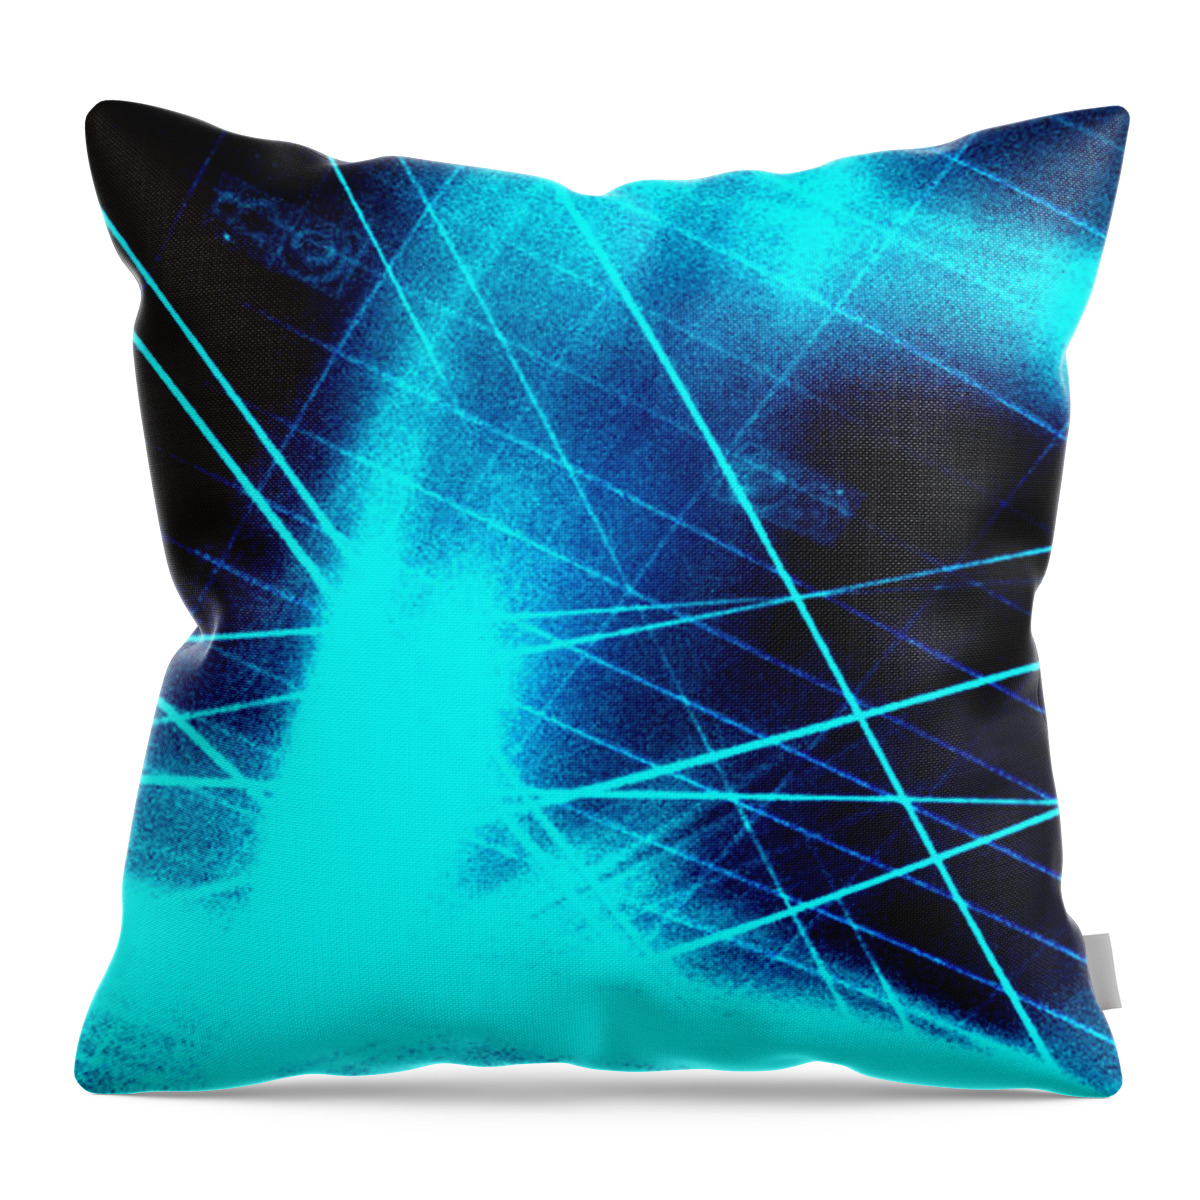  Throw Pillow featuring the digital art Laser World Part 20 2020 Master by The Lovelock experience